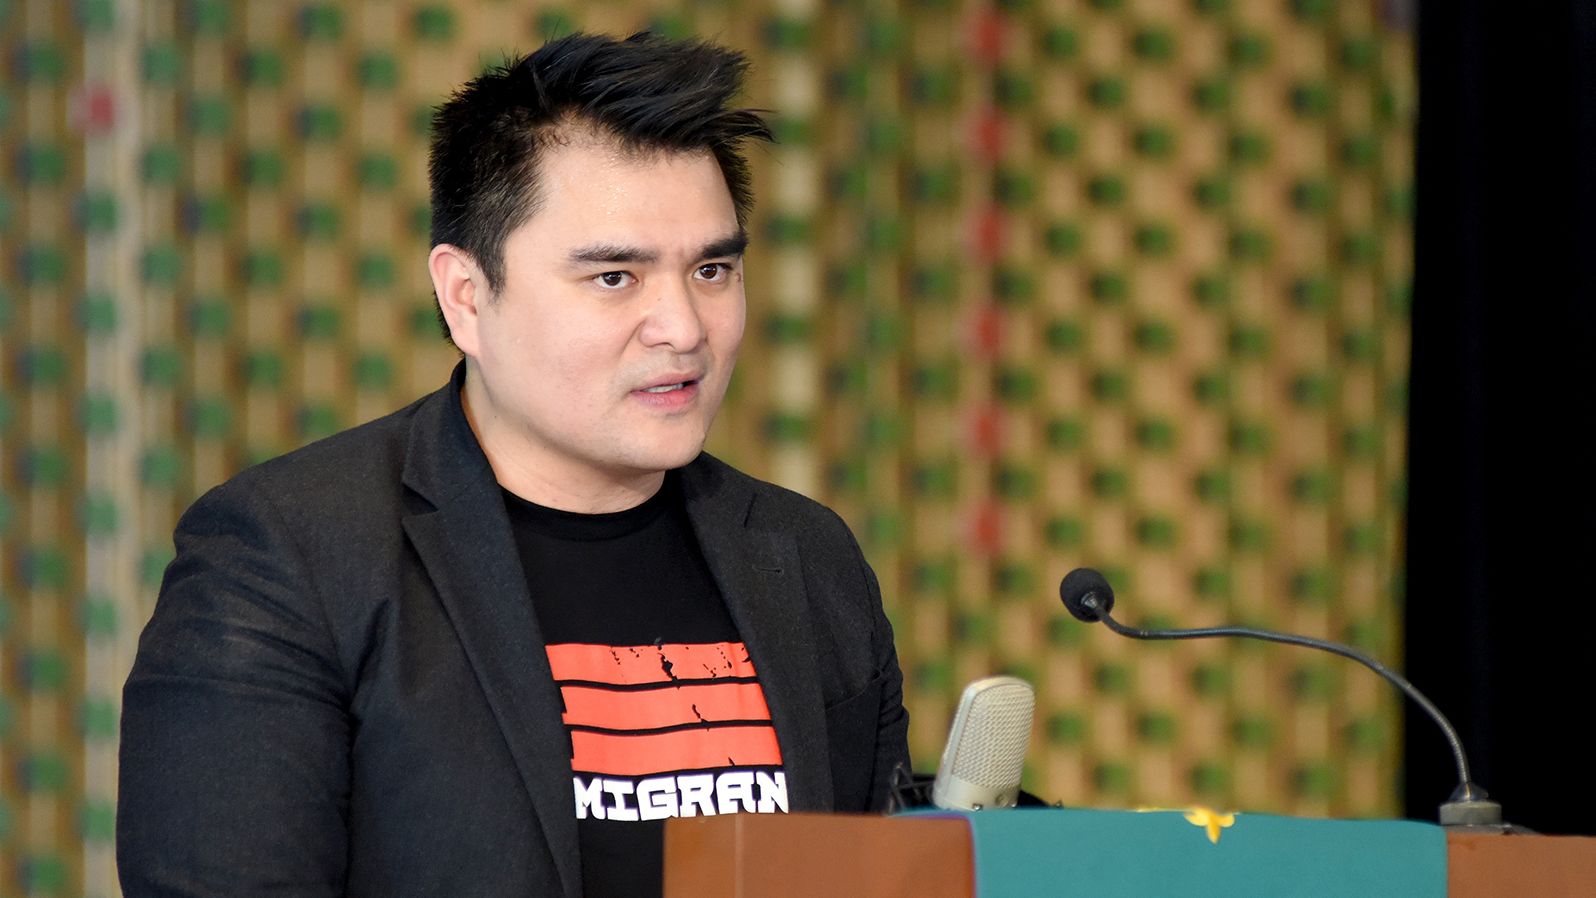 Define American founder Jose Antonio Vargas says shaping storylines on TV is an important role for his organization. "If what we can help do is introduce immigrants as human beings that are complex and nuanced, we have done our job," he says.